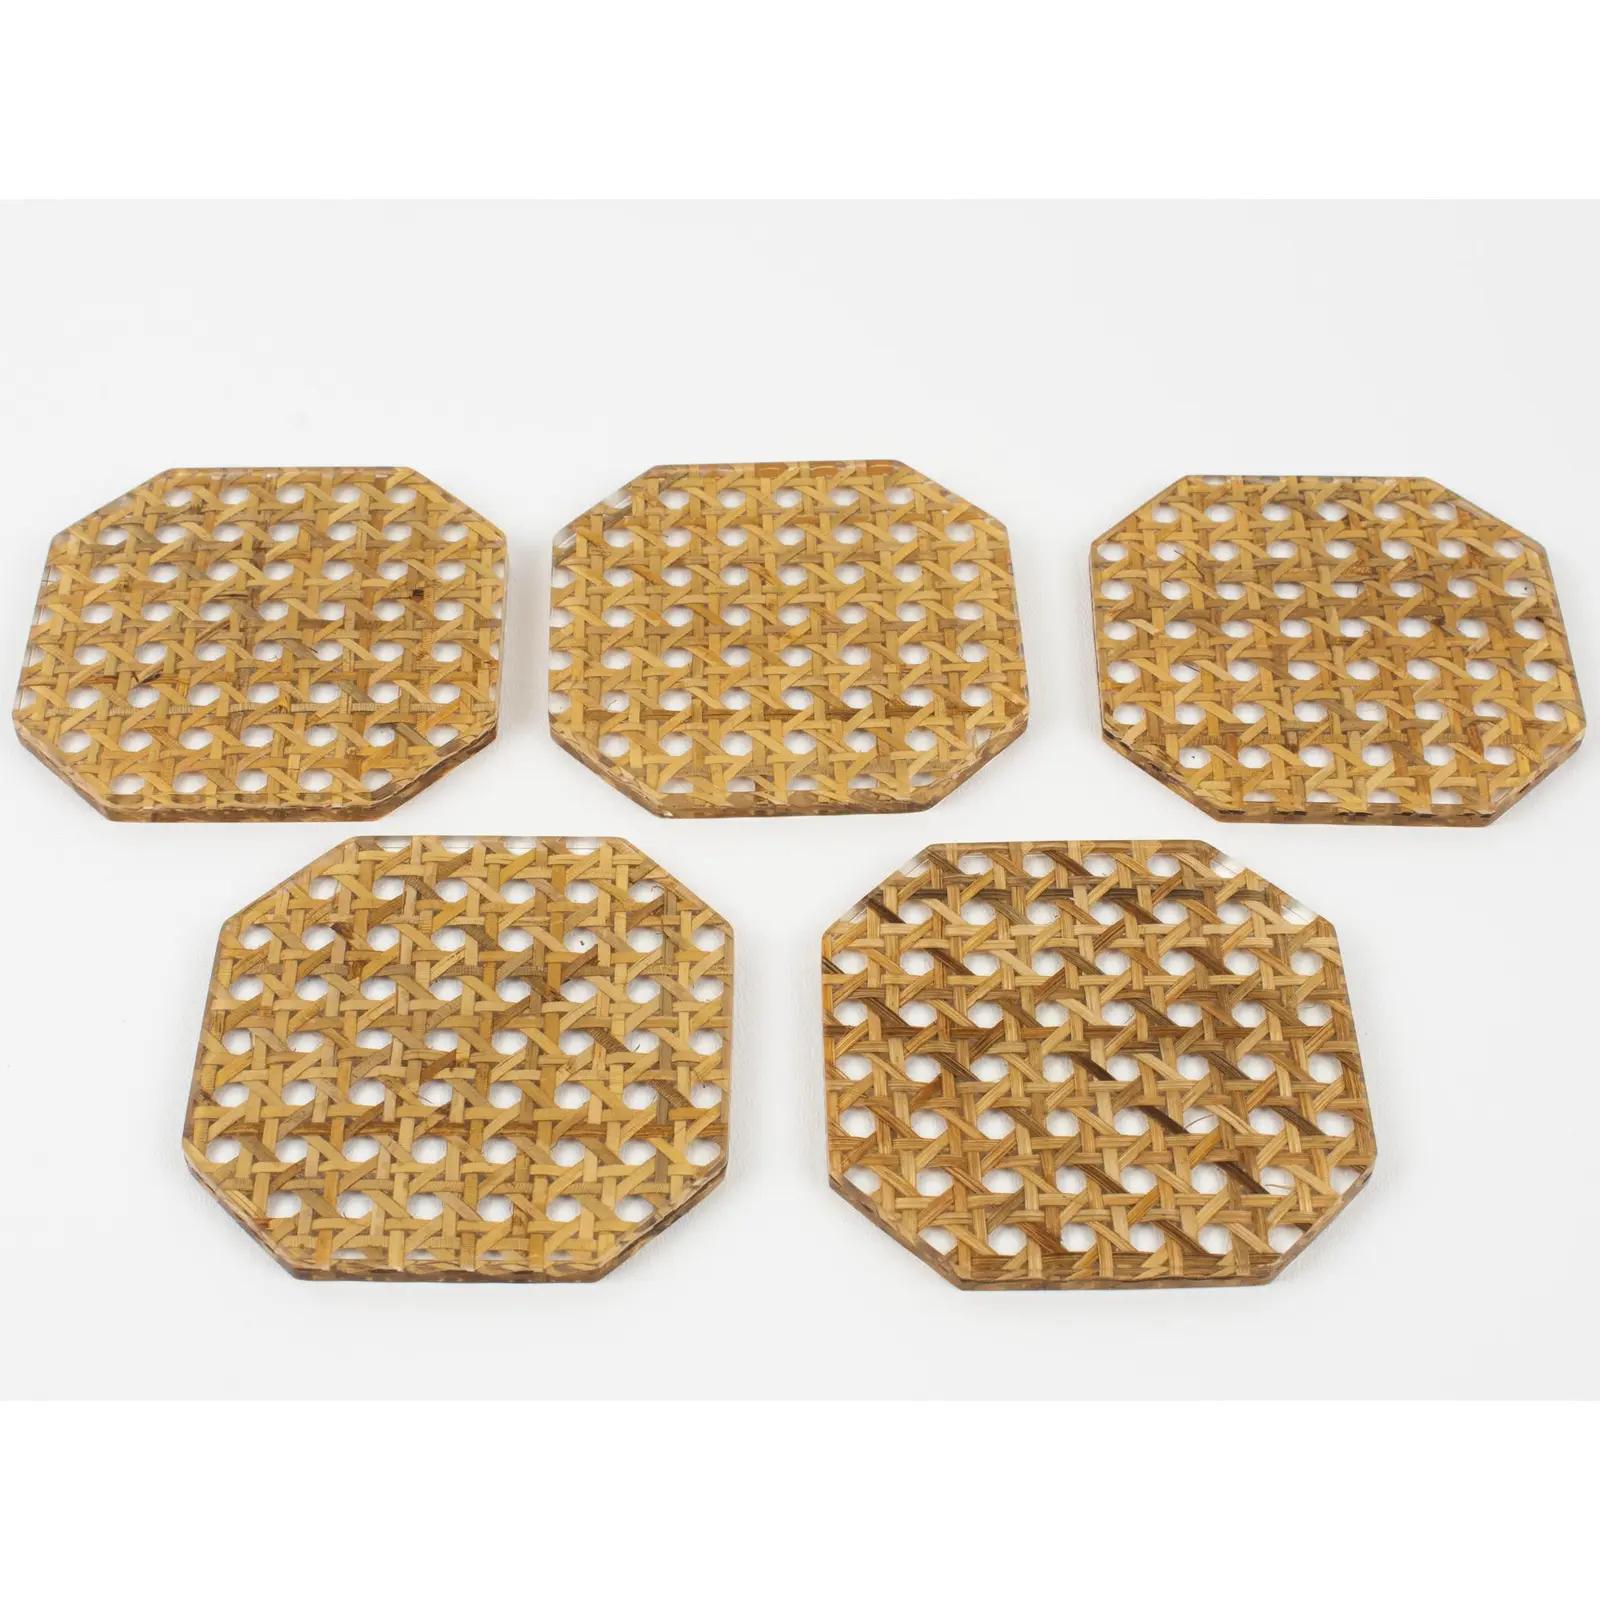 Modern Christian Dior Lucite and Rattan Barware Coasters, set of 5 pieces For Sale